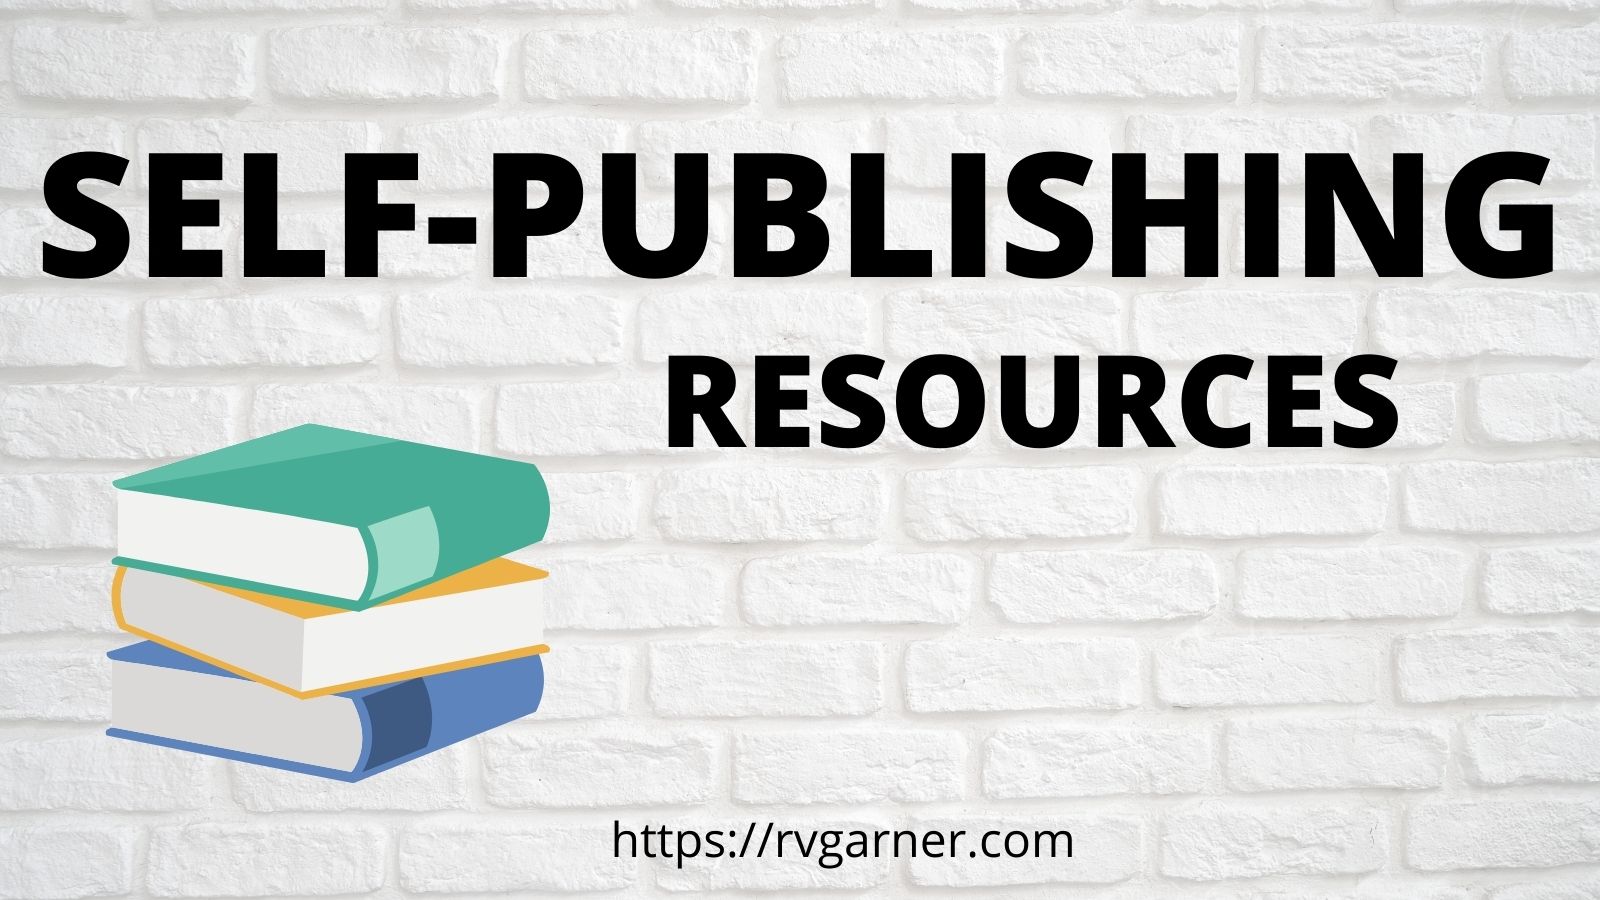 SELF-PUBLISHING RESOURCES